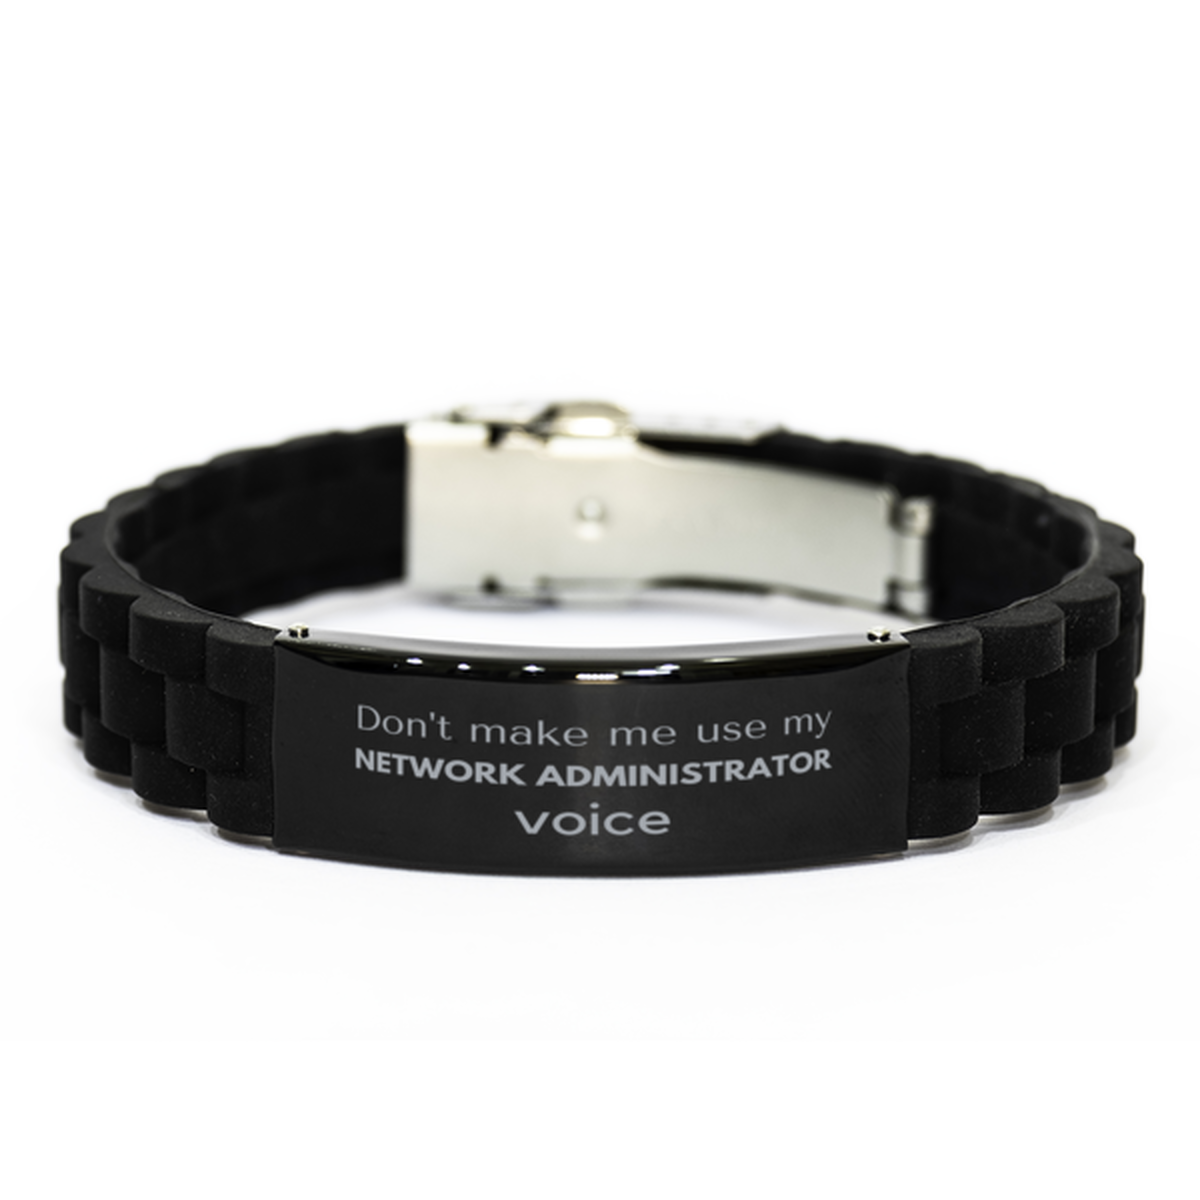 Don't make me use my Network Administrator voice, Sarcasm Network Administrator Gifts, Christmas Network Administrator Black Glidelock Clasp Bracelet Birthday Unique Gifts For Network Administrator Coworkers, Men, Women, Colleague, Friends